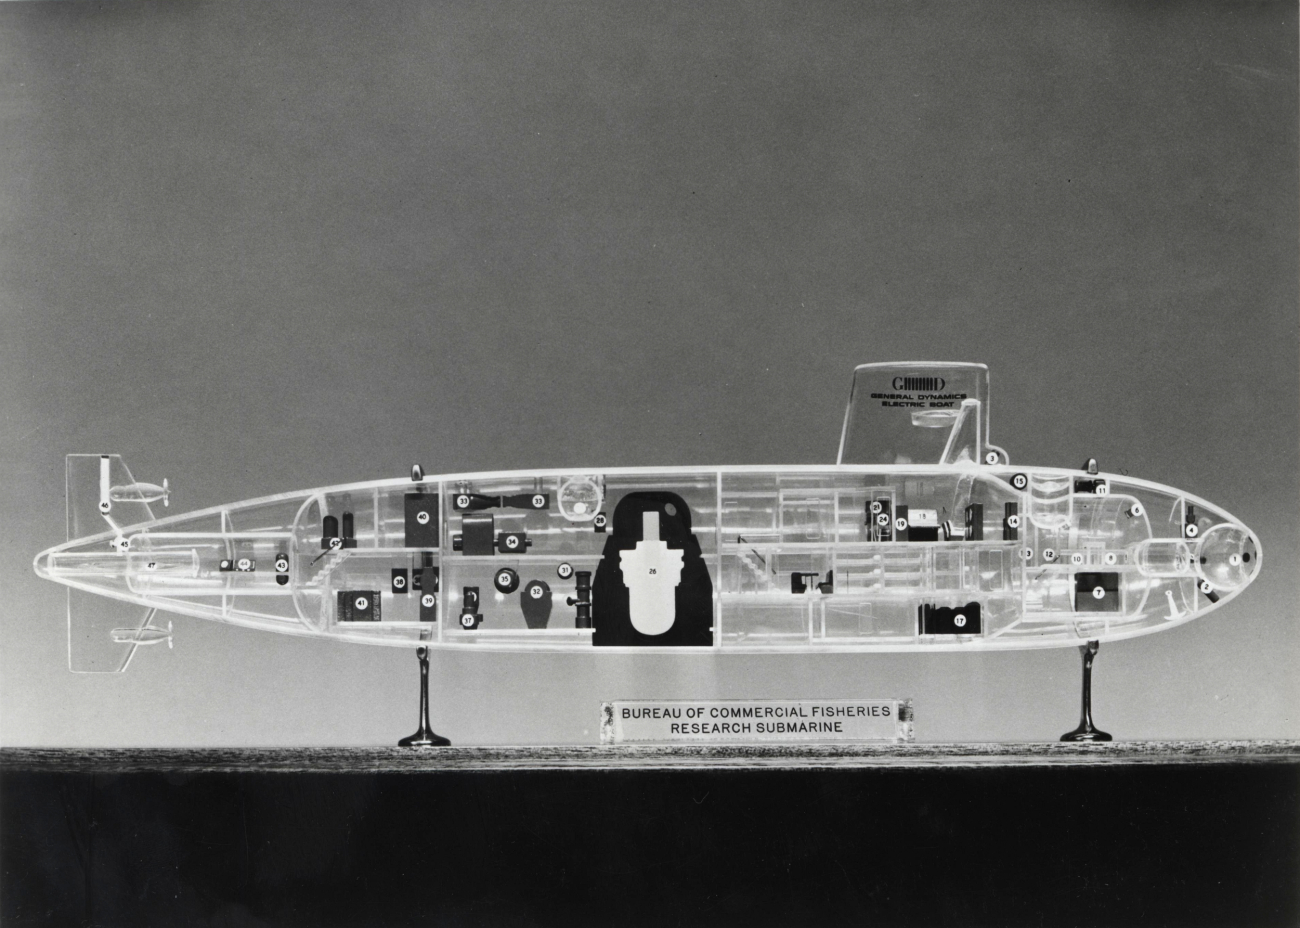 Artwork - artist's conception of a research submersible to be used by theBureau of Commercial Fisheries